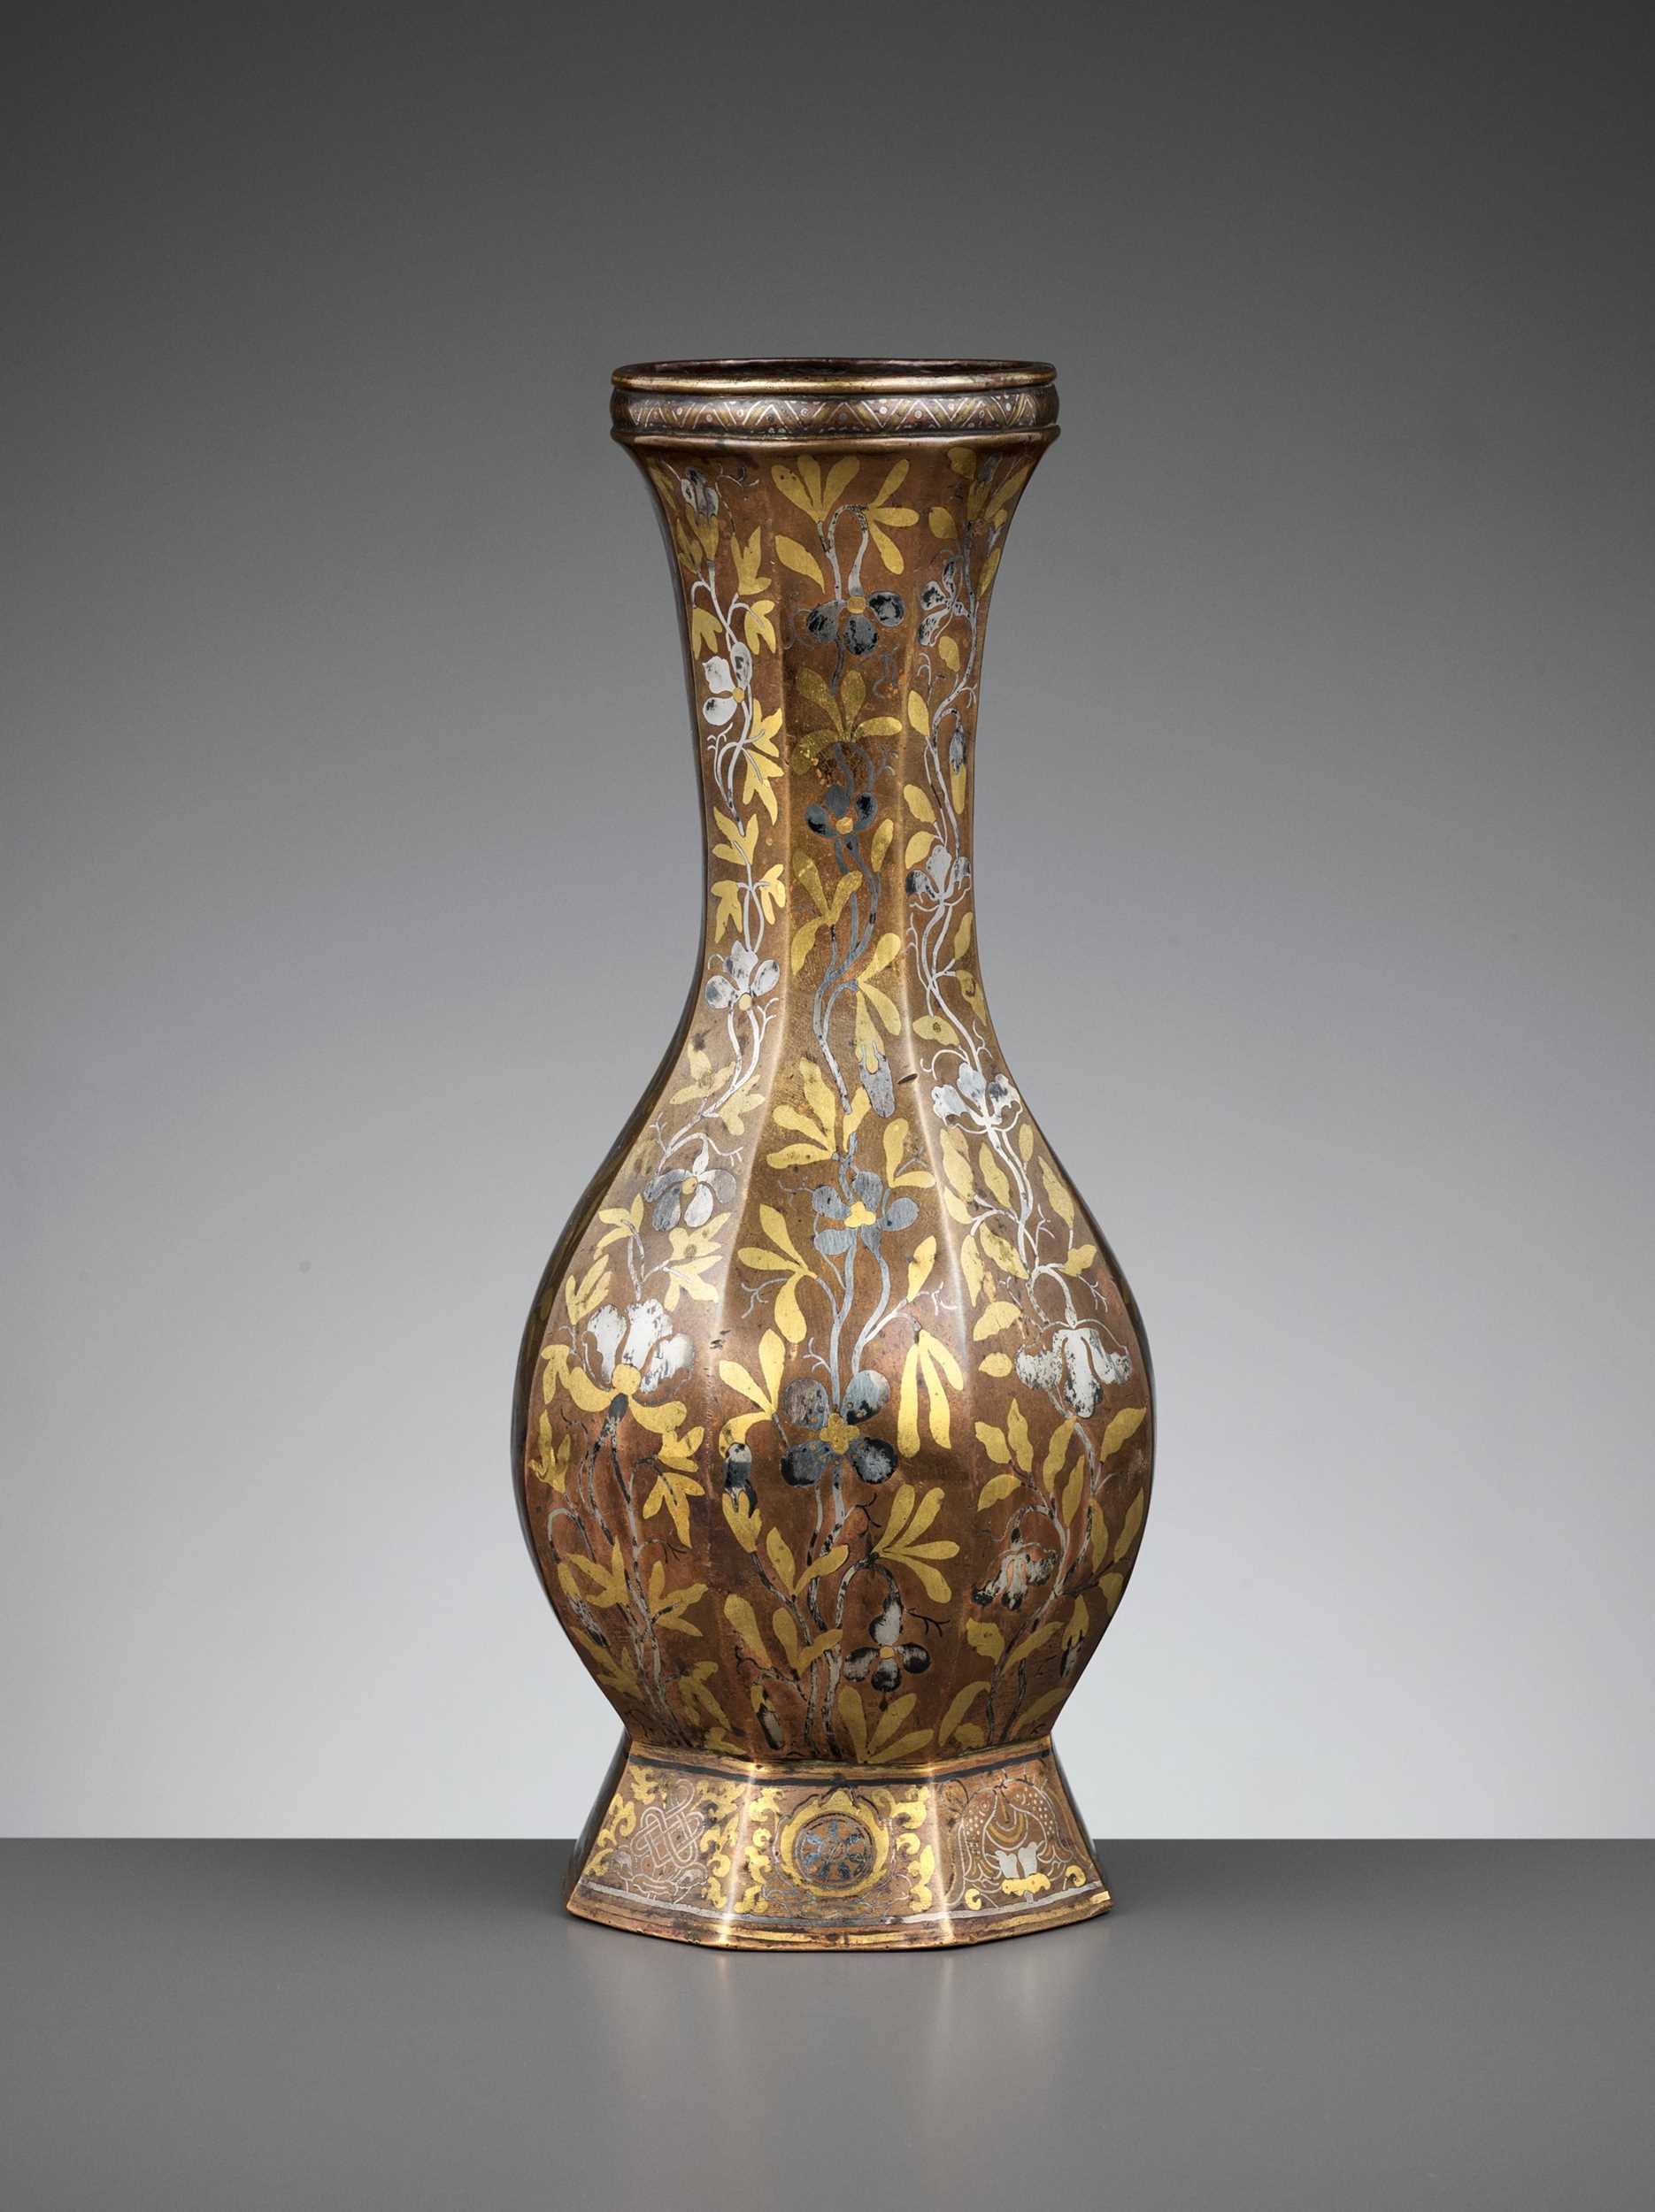 Lot 348 - A ‘BAJIXIANG’ SILVER- AND GOLD-INLAID BRONZE OCTAGONAL VASE, MING DYNASTY